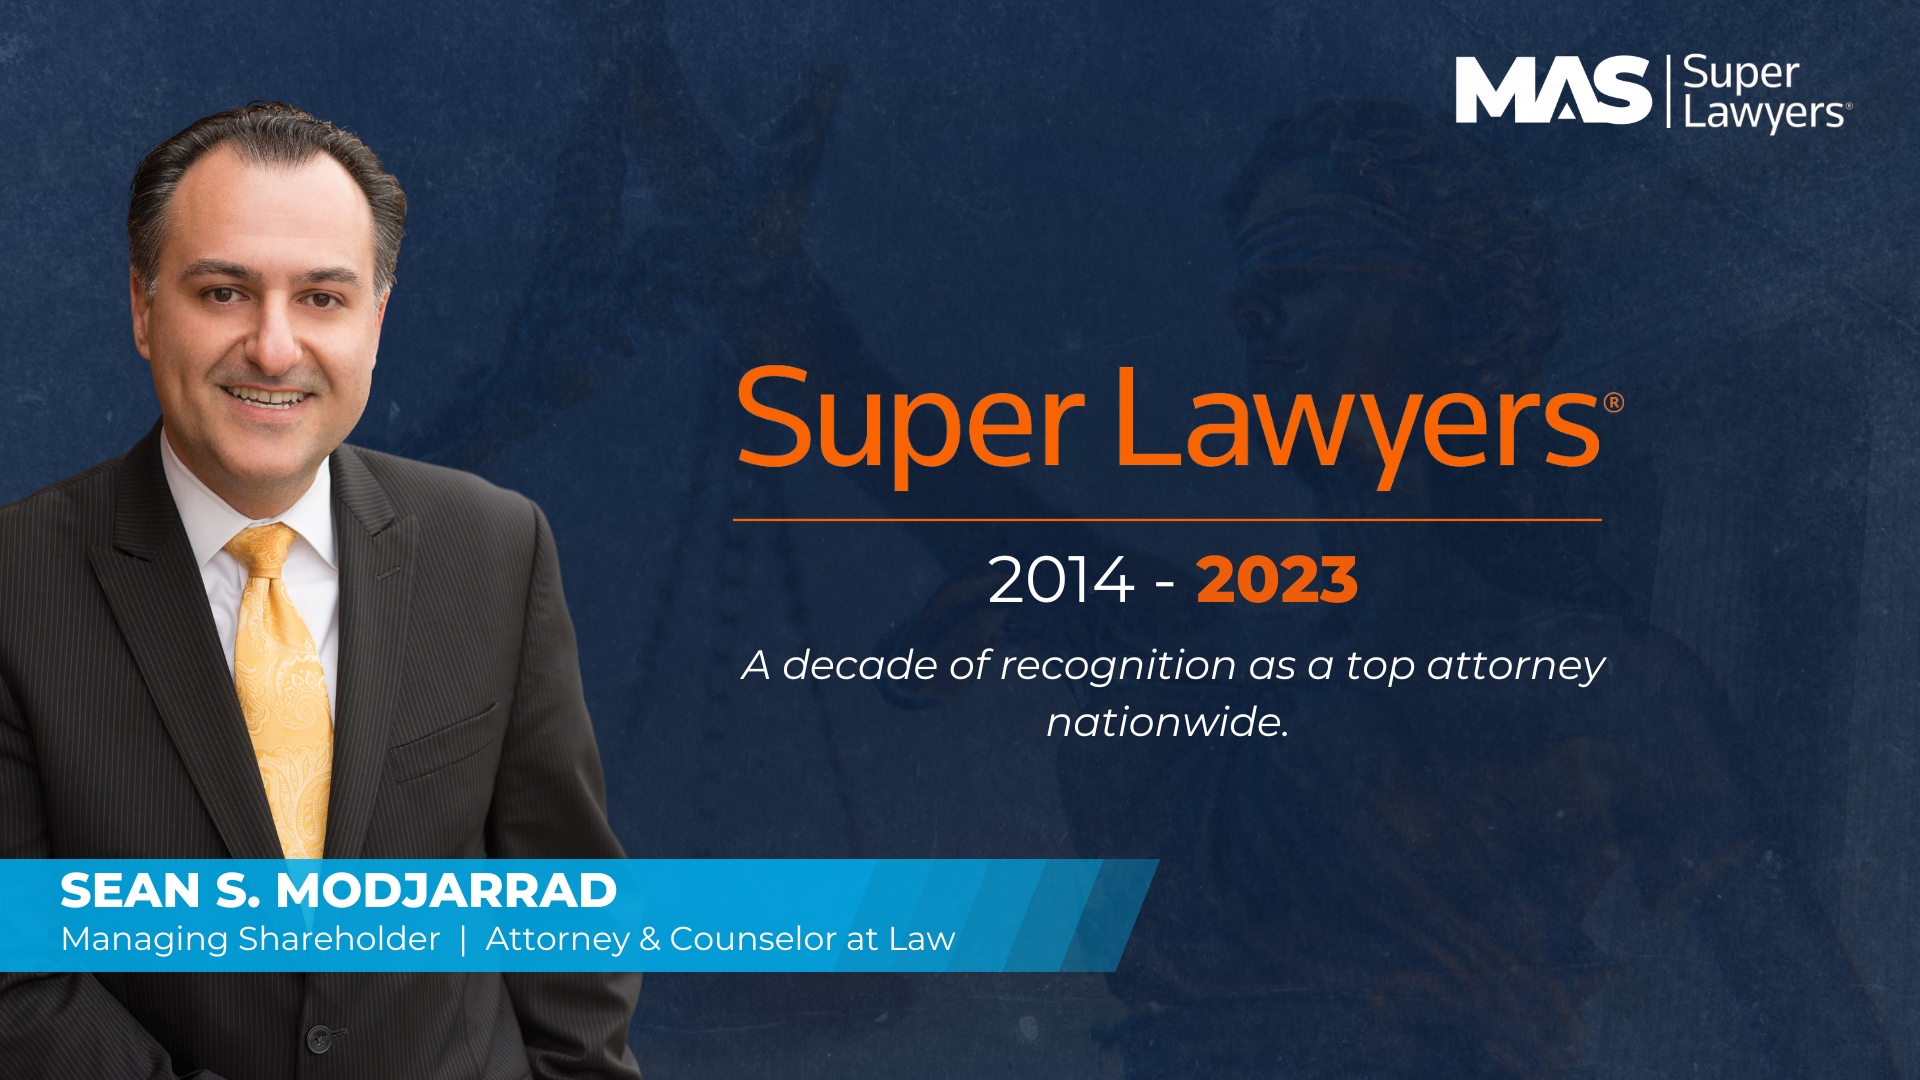 Super Lawyers Decade of Recognition 2014-2023